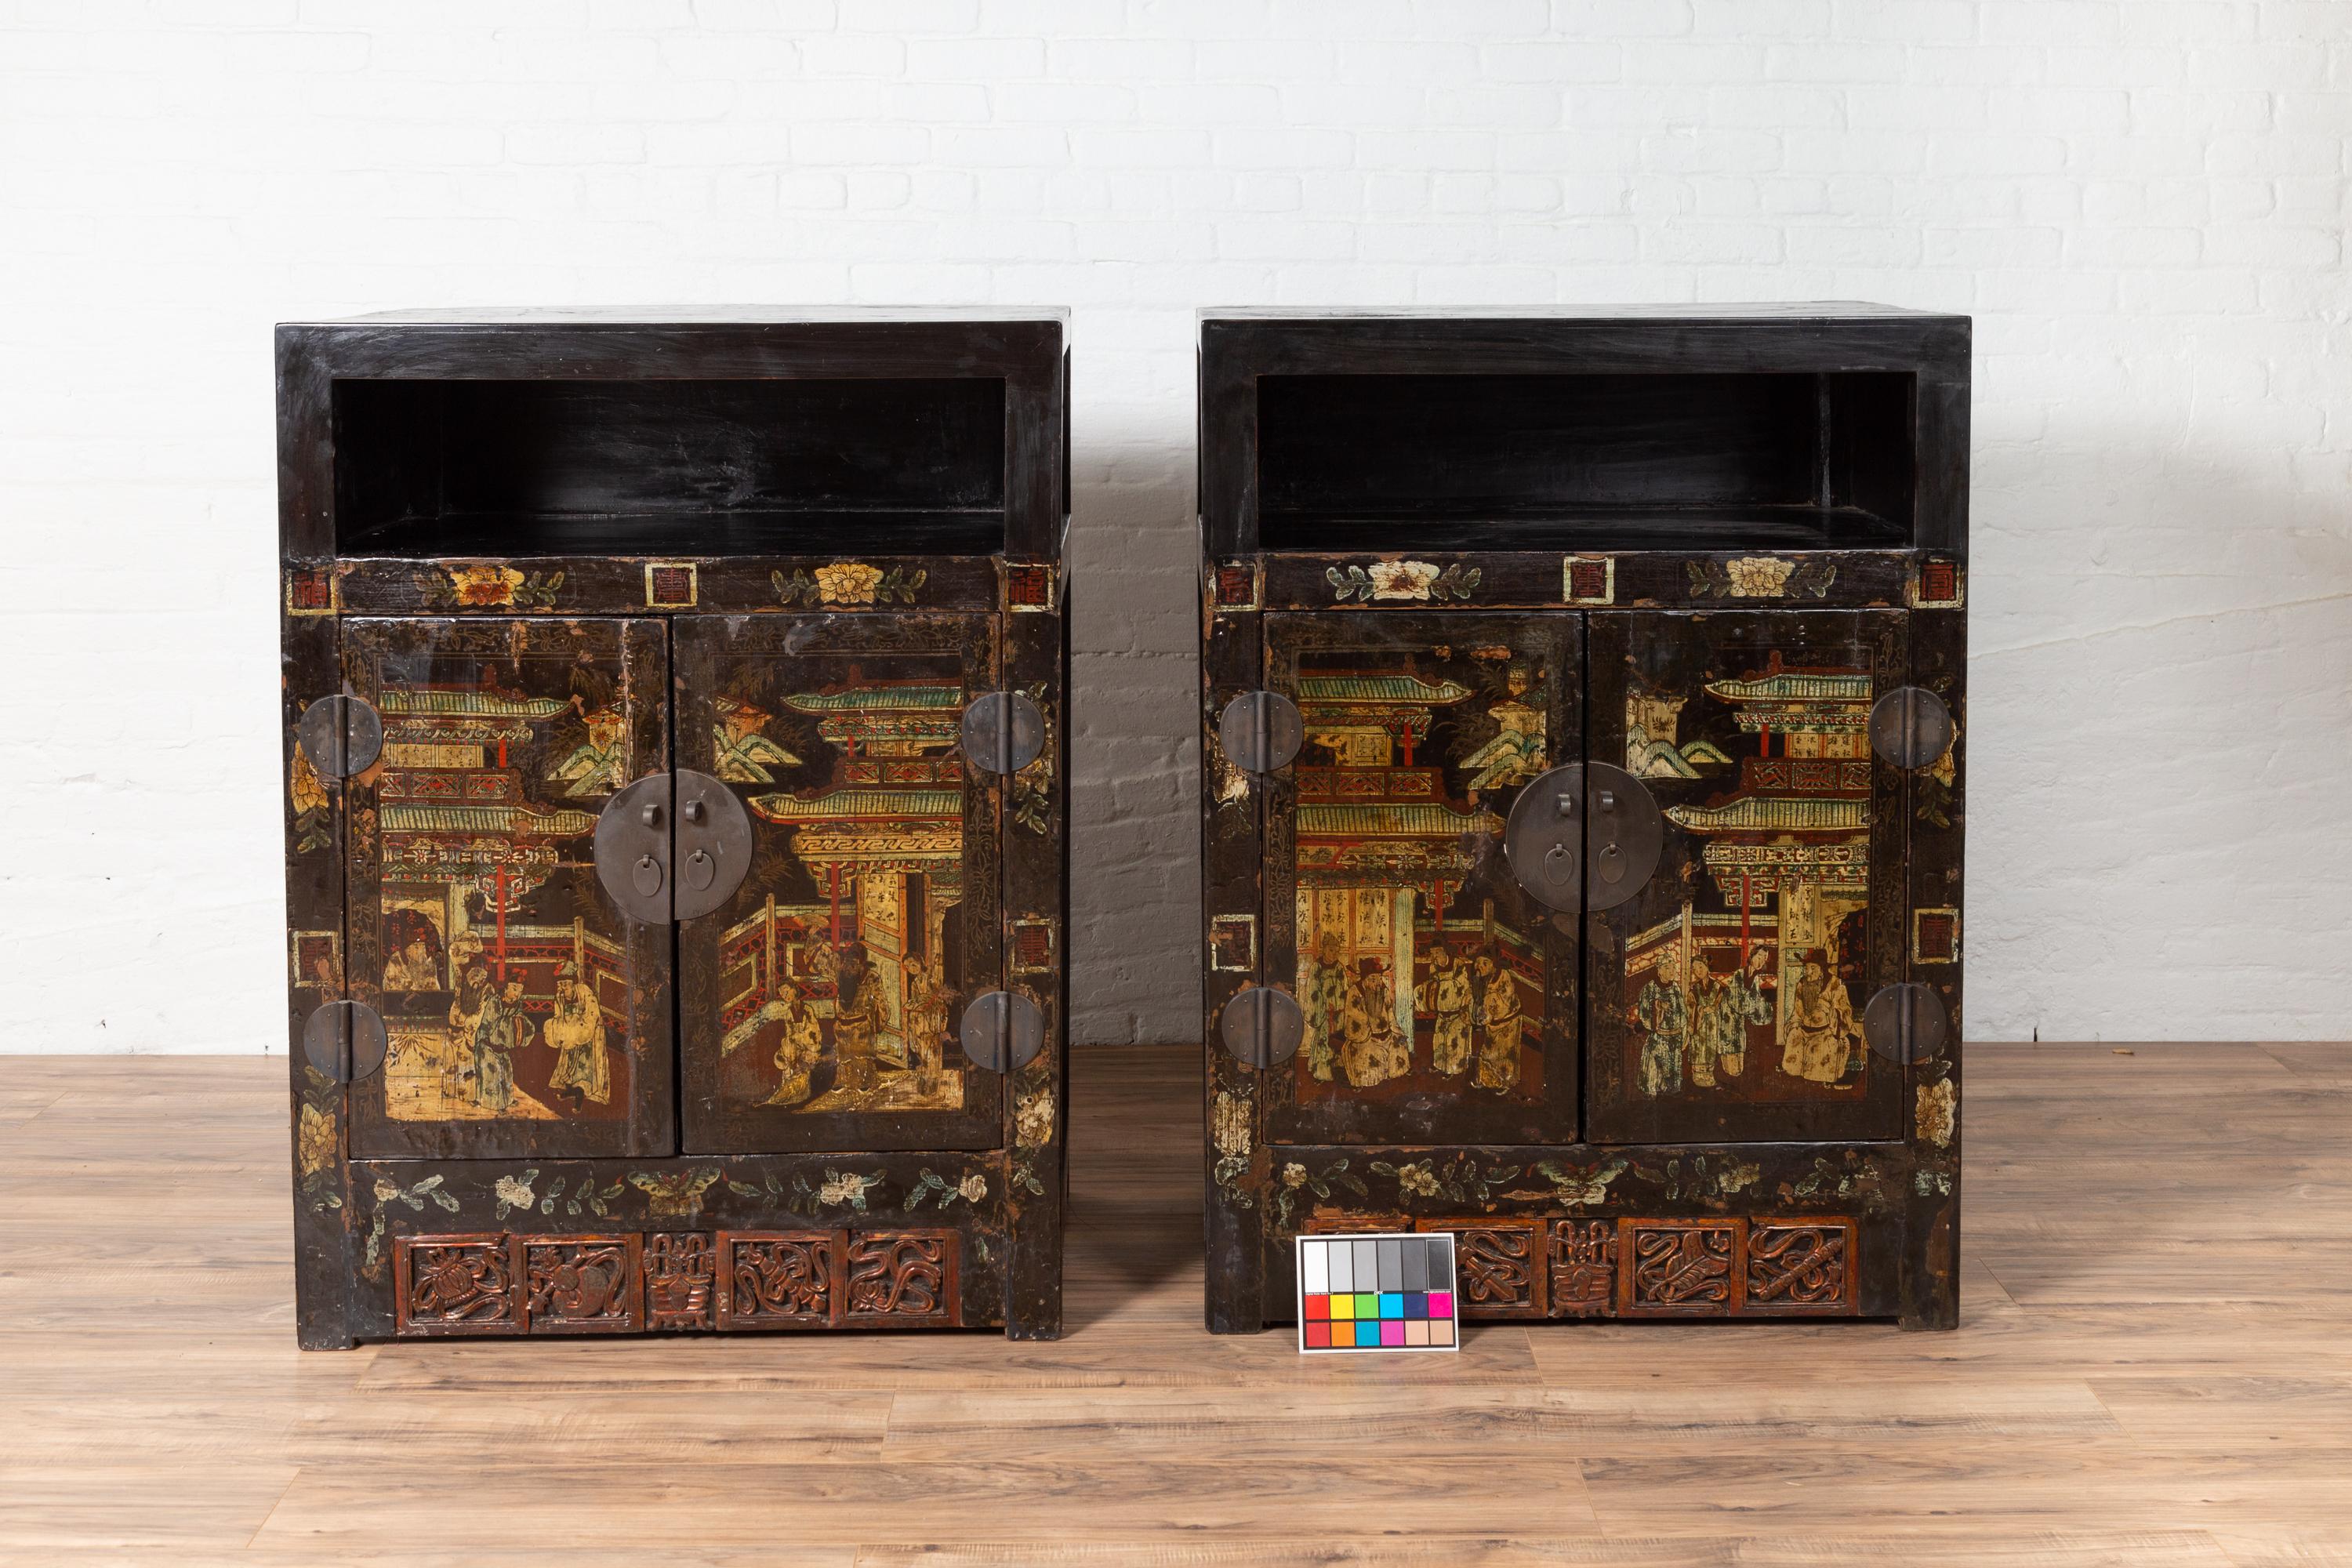 A pair of Chinese tall display cabinets from the 19th century, with hand-painted Chinoiserie décor depicting people and traditional architectures in a landscape. Born in China during the 19th century, each of this pair of display cabinets features